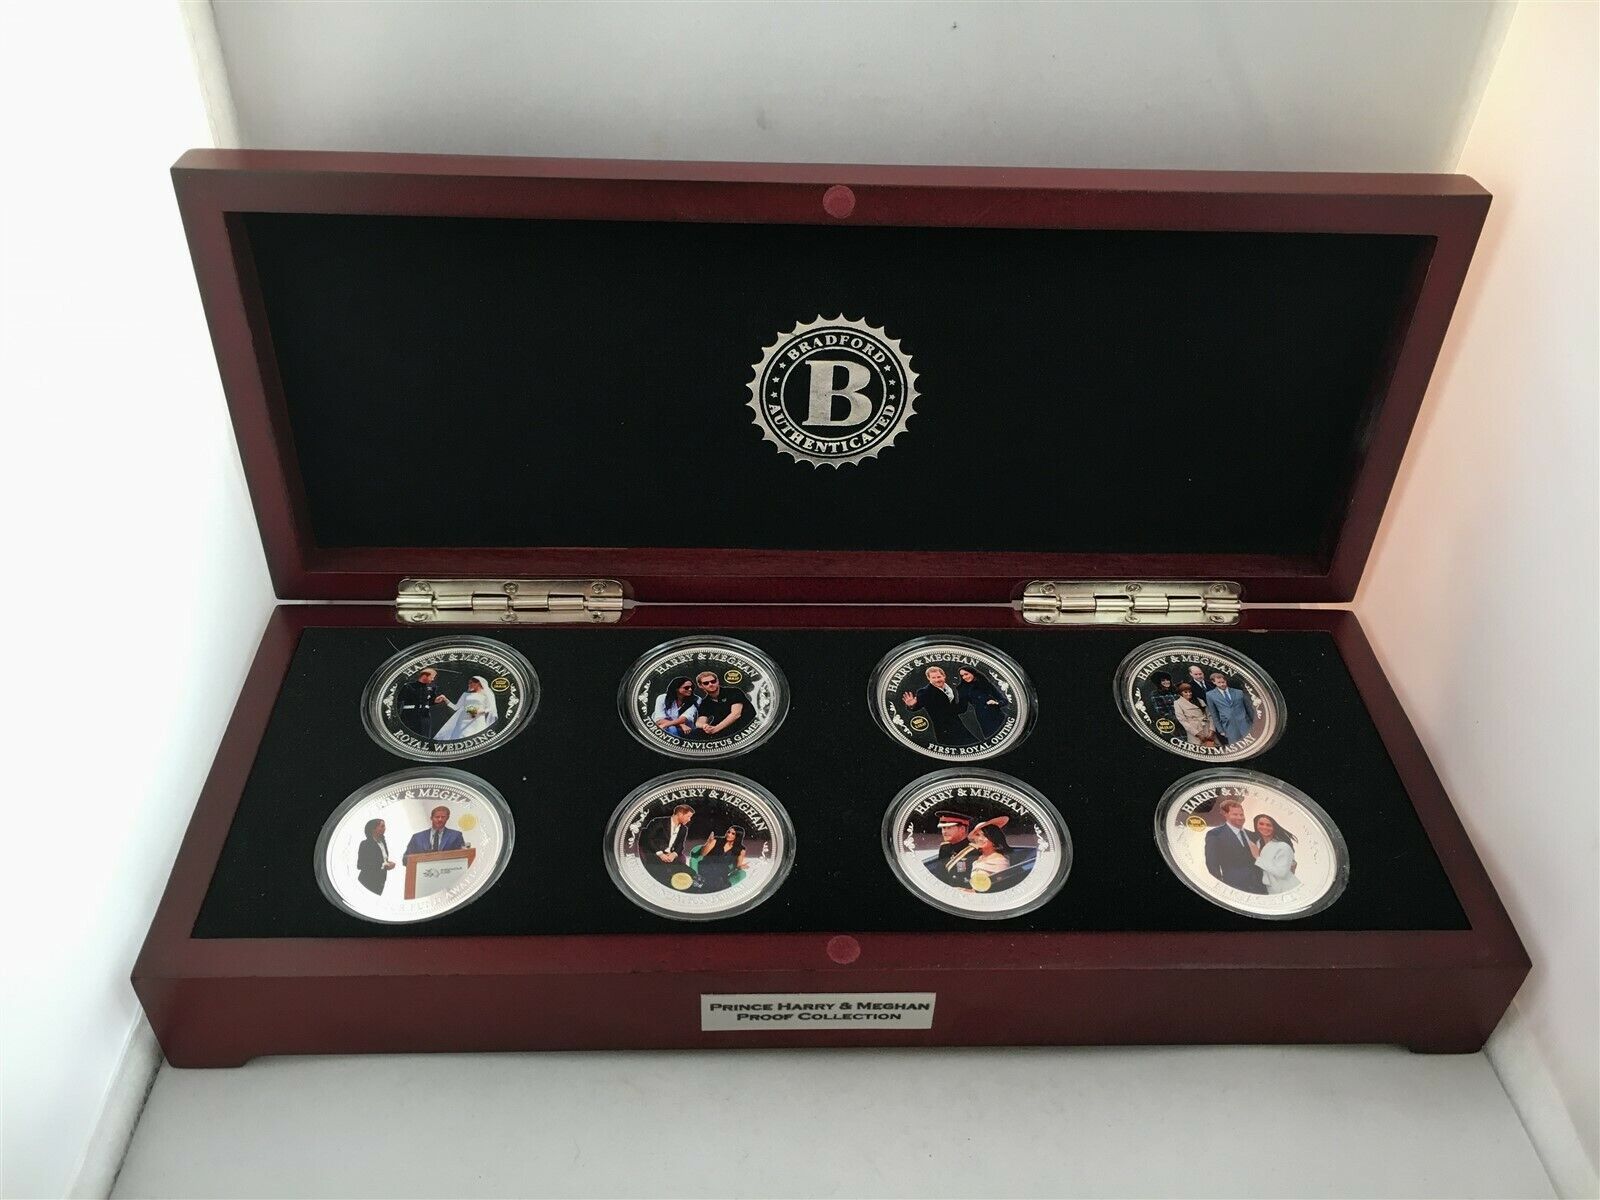 Prince Harry & Meghan Proof Coin Collection Boxed Set of 8 Photo No COA